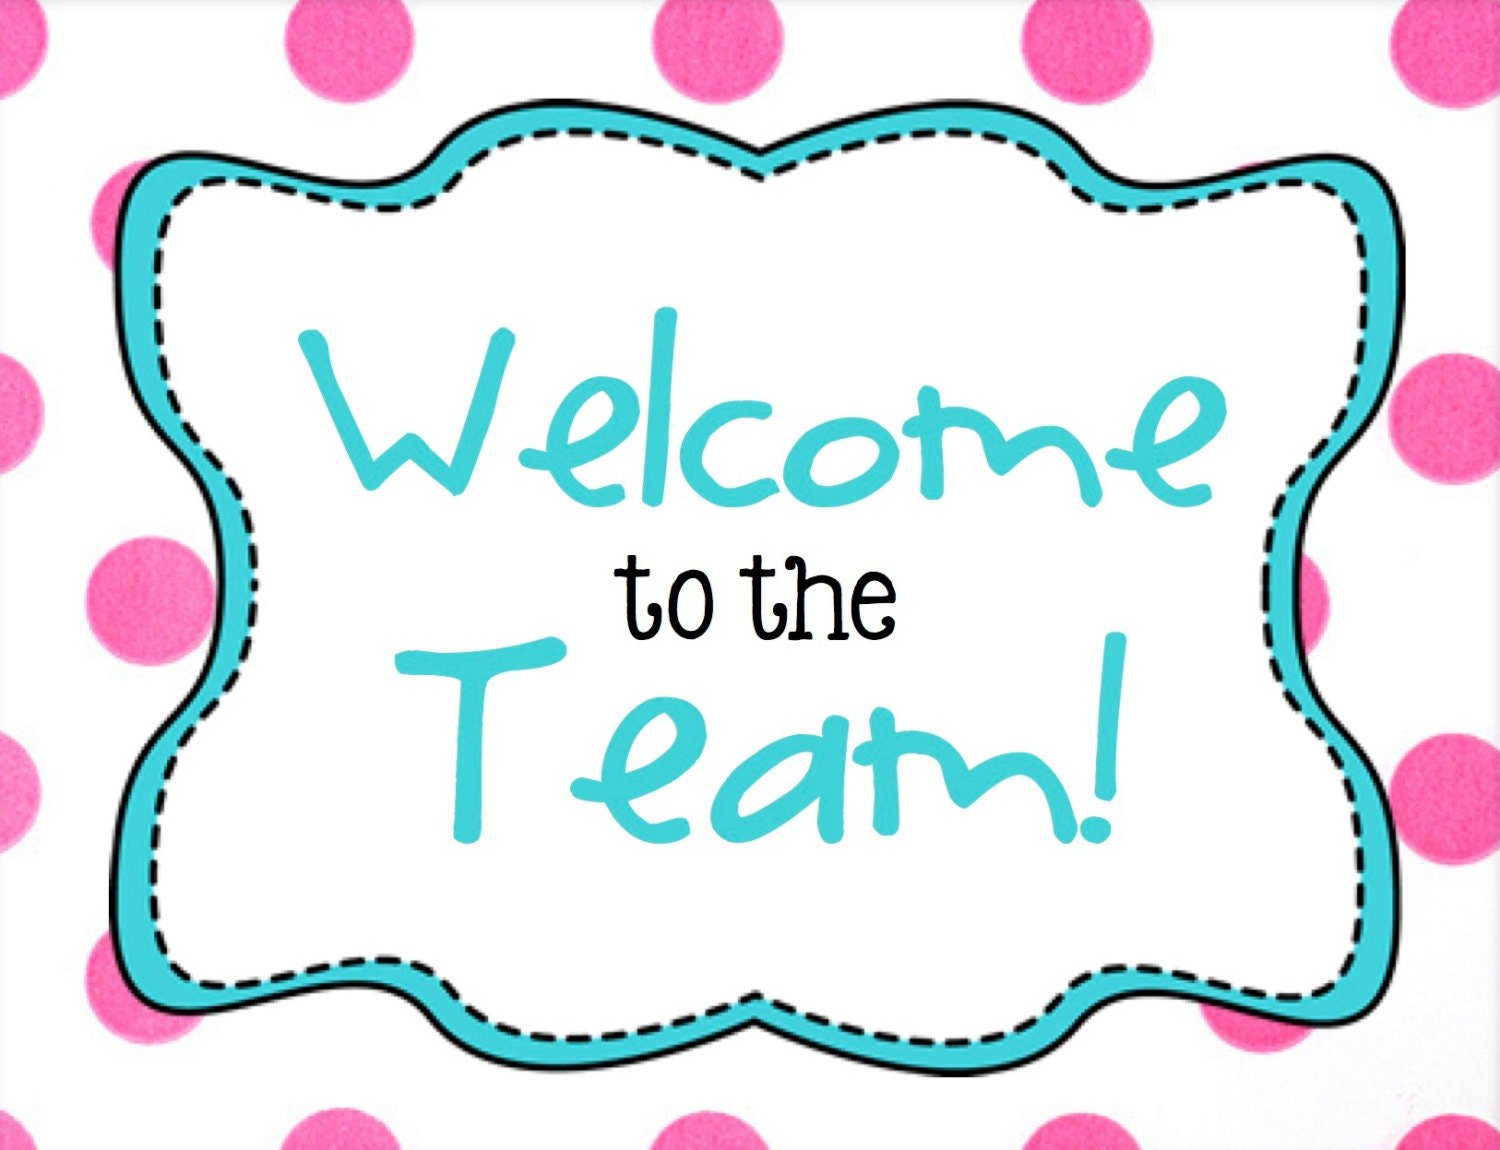 welcome-to-the-team-postcard-by-happydotcreatives-on-etsy